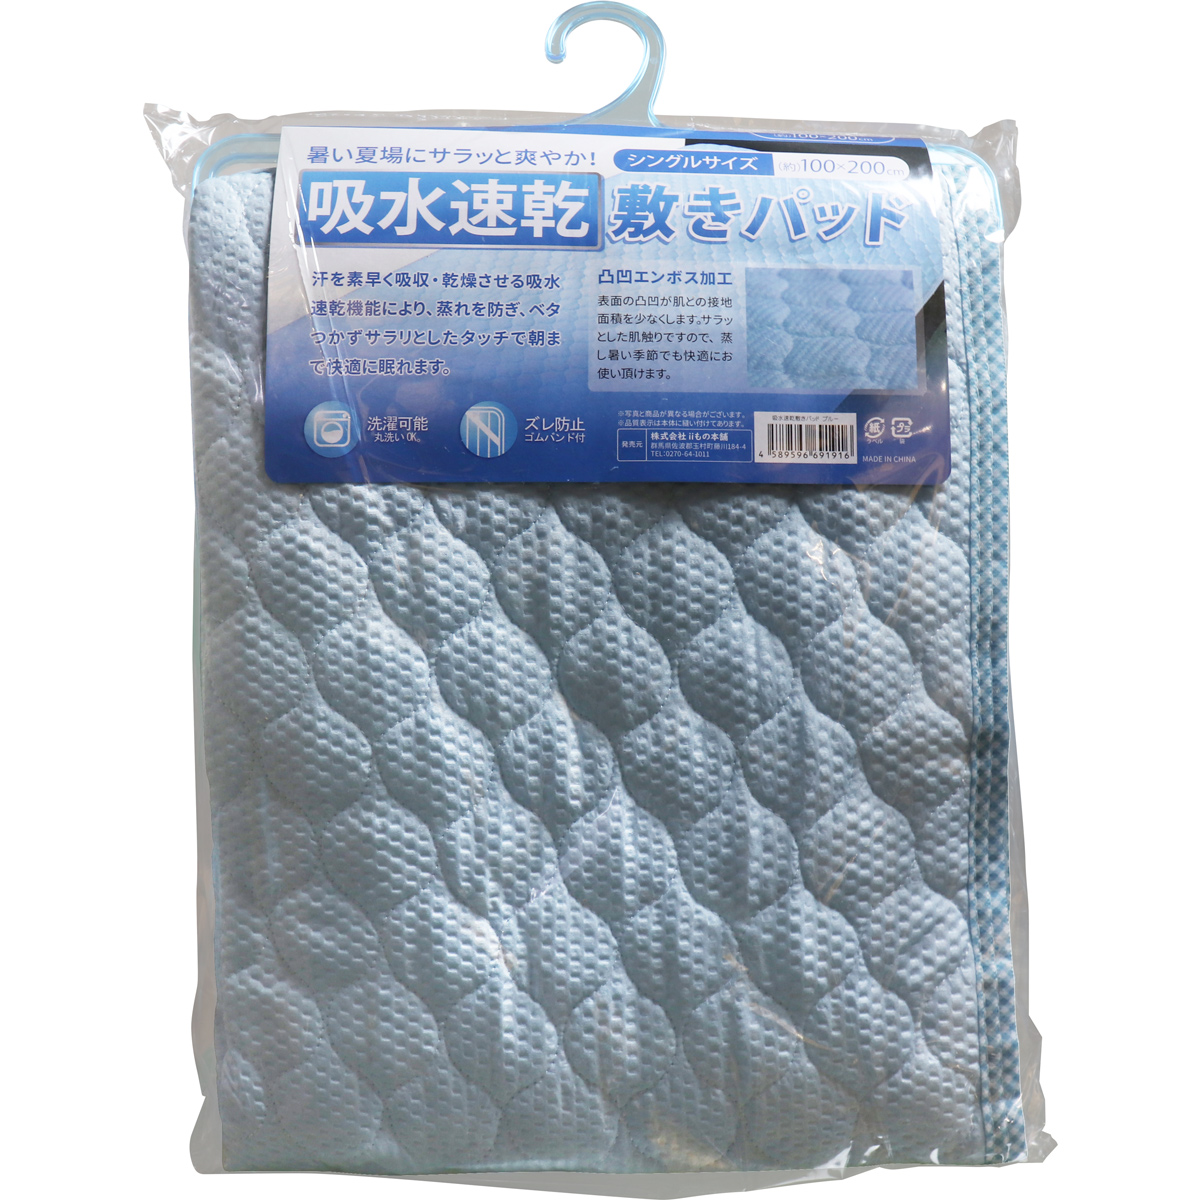 Picture of Blue color Quick Dry Cooling Pad single size